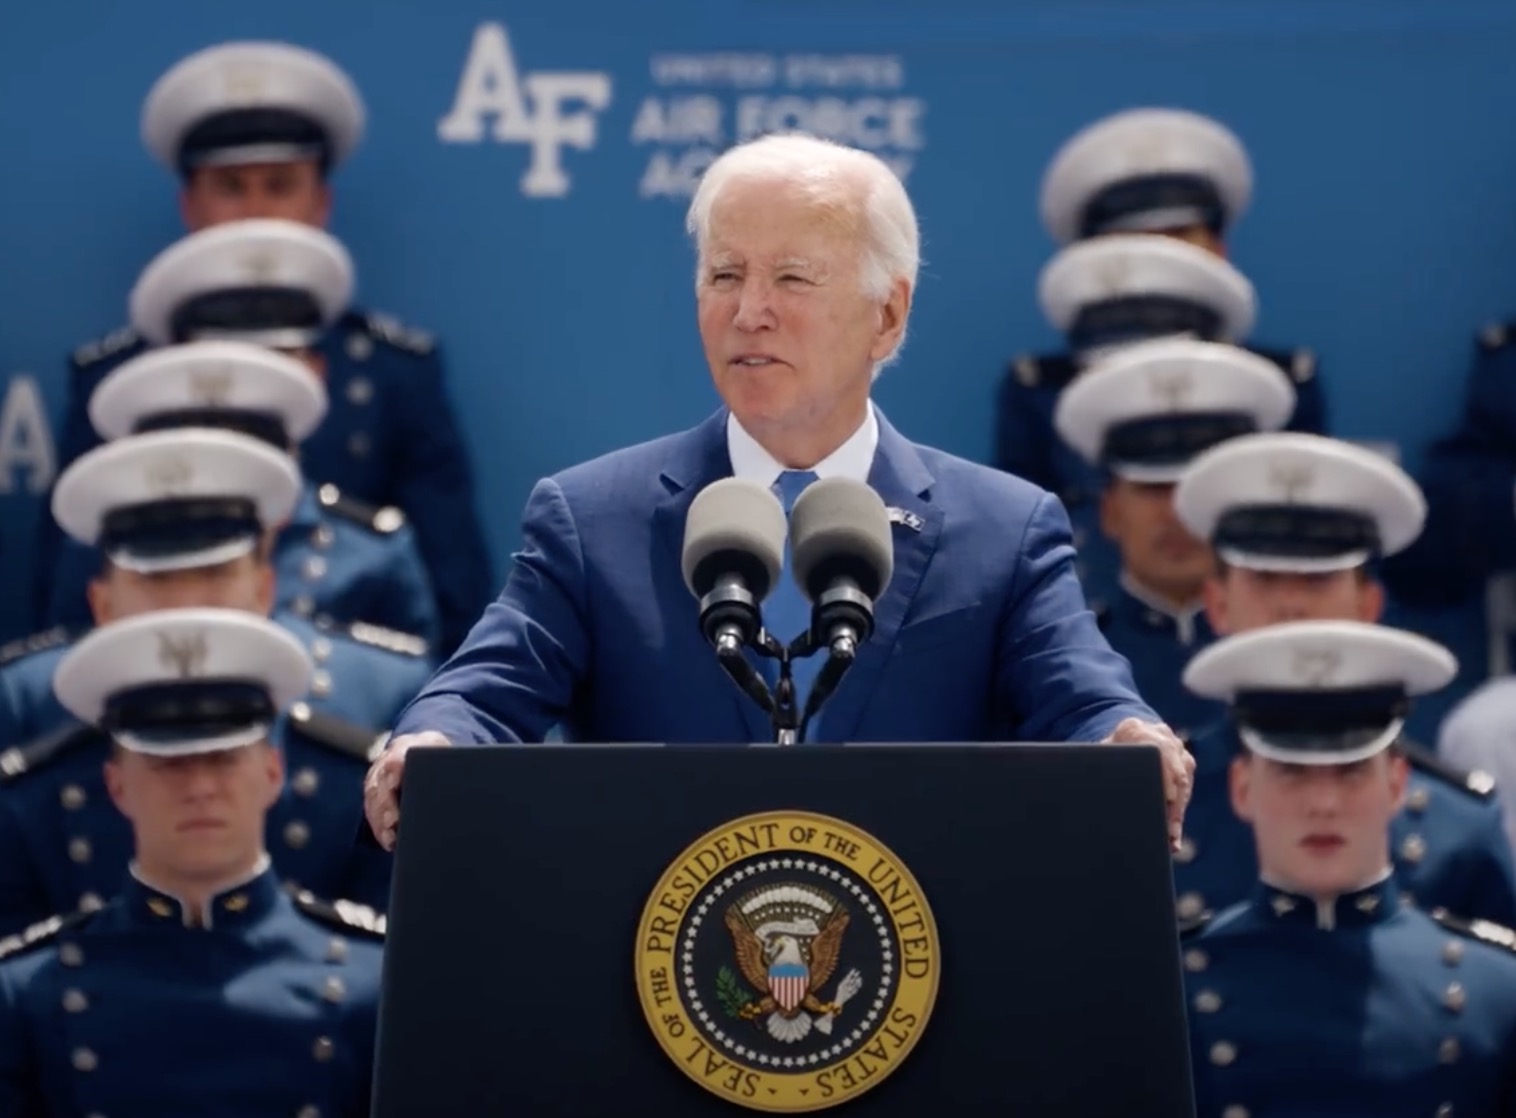 President Biden References The Epic Pass In Commencement Speech